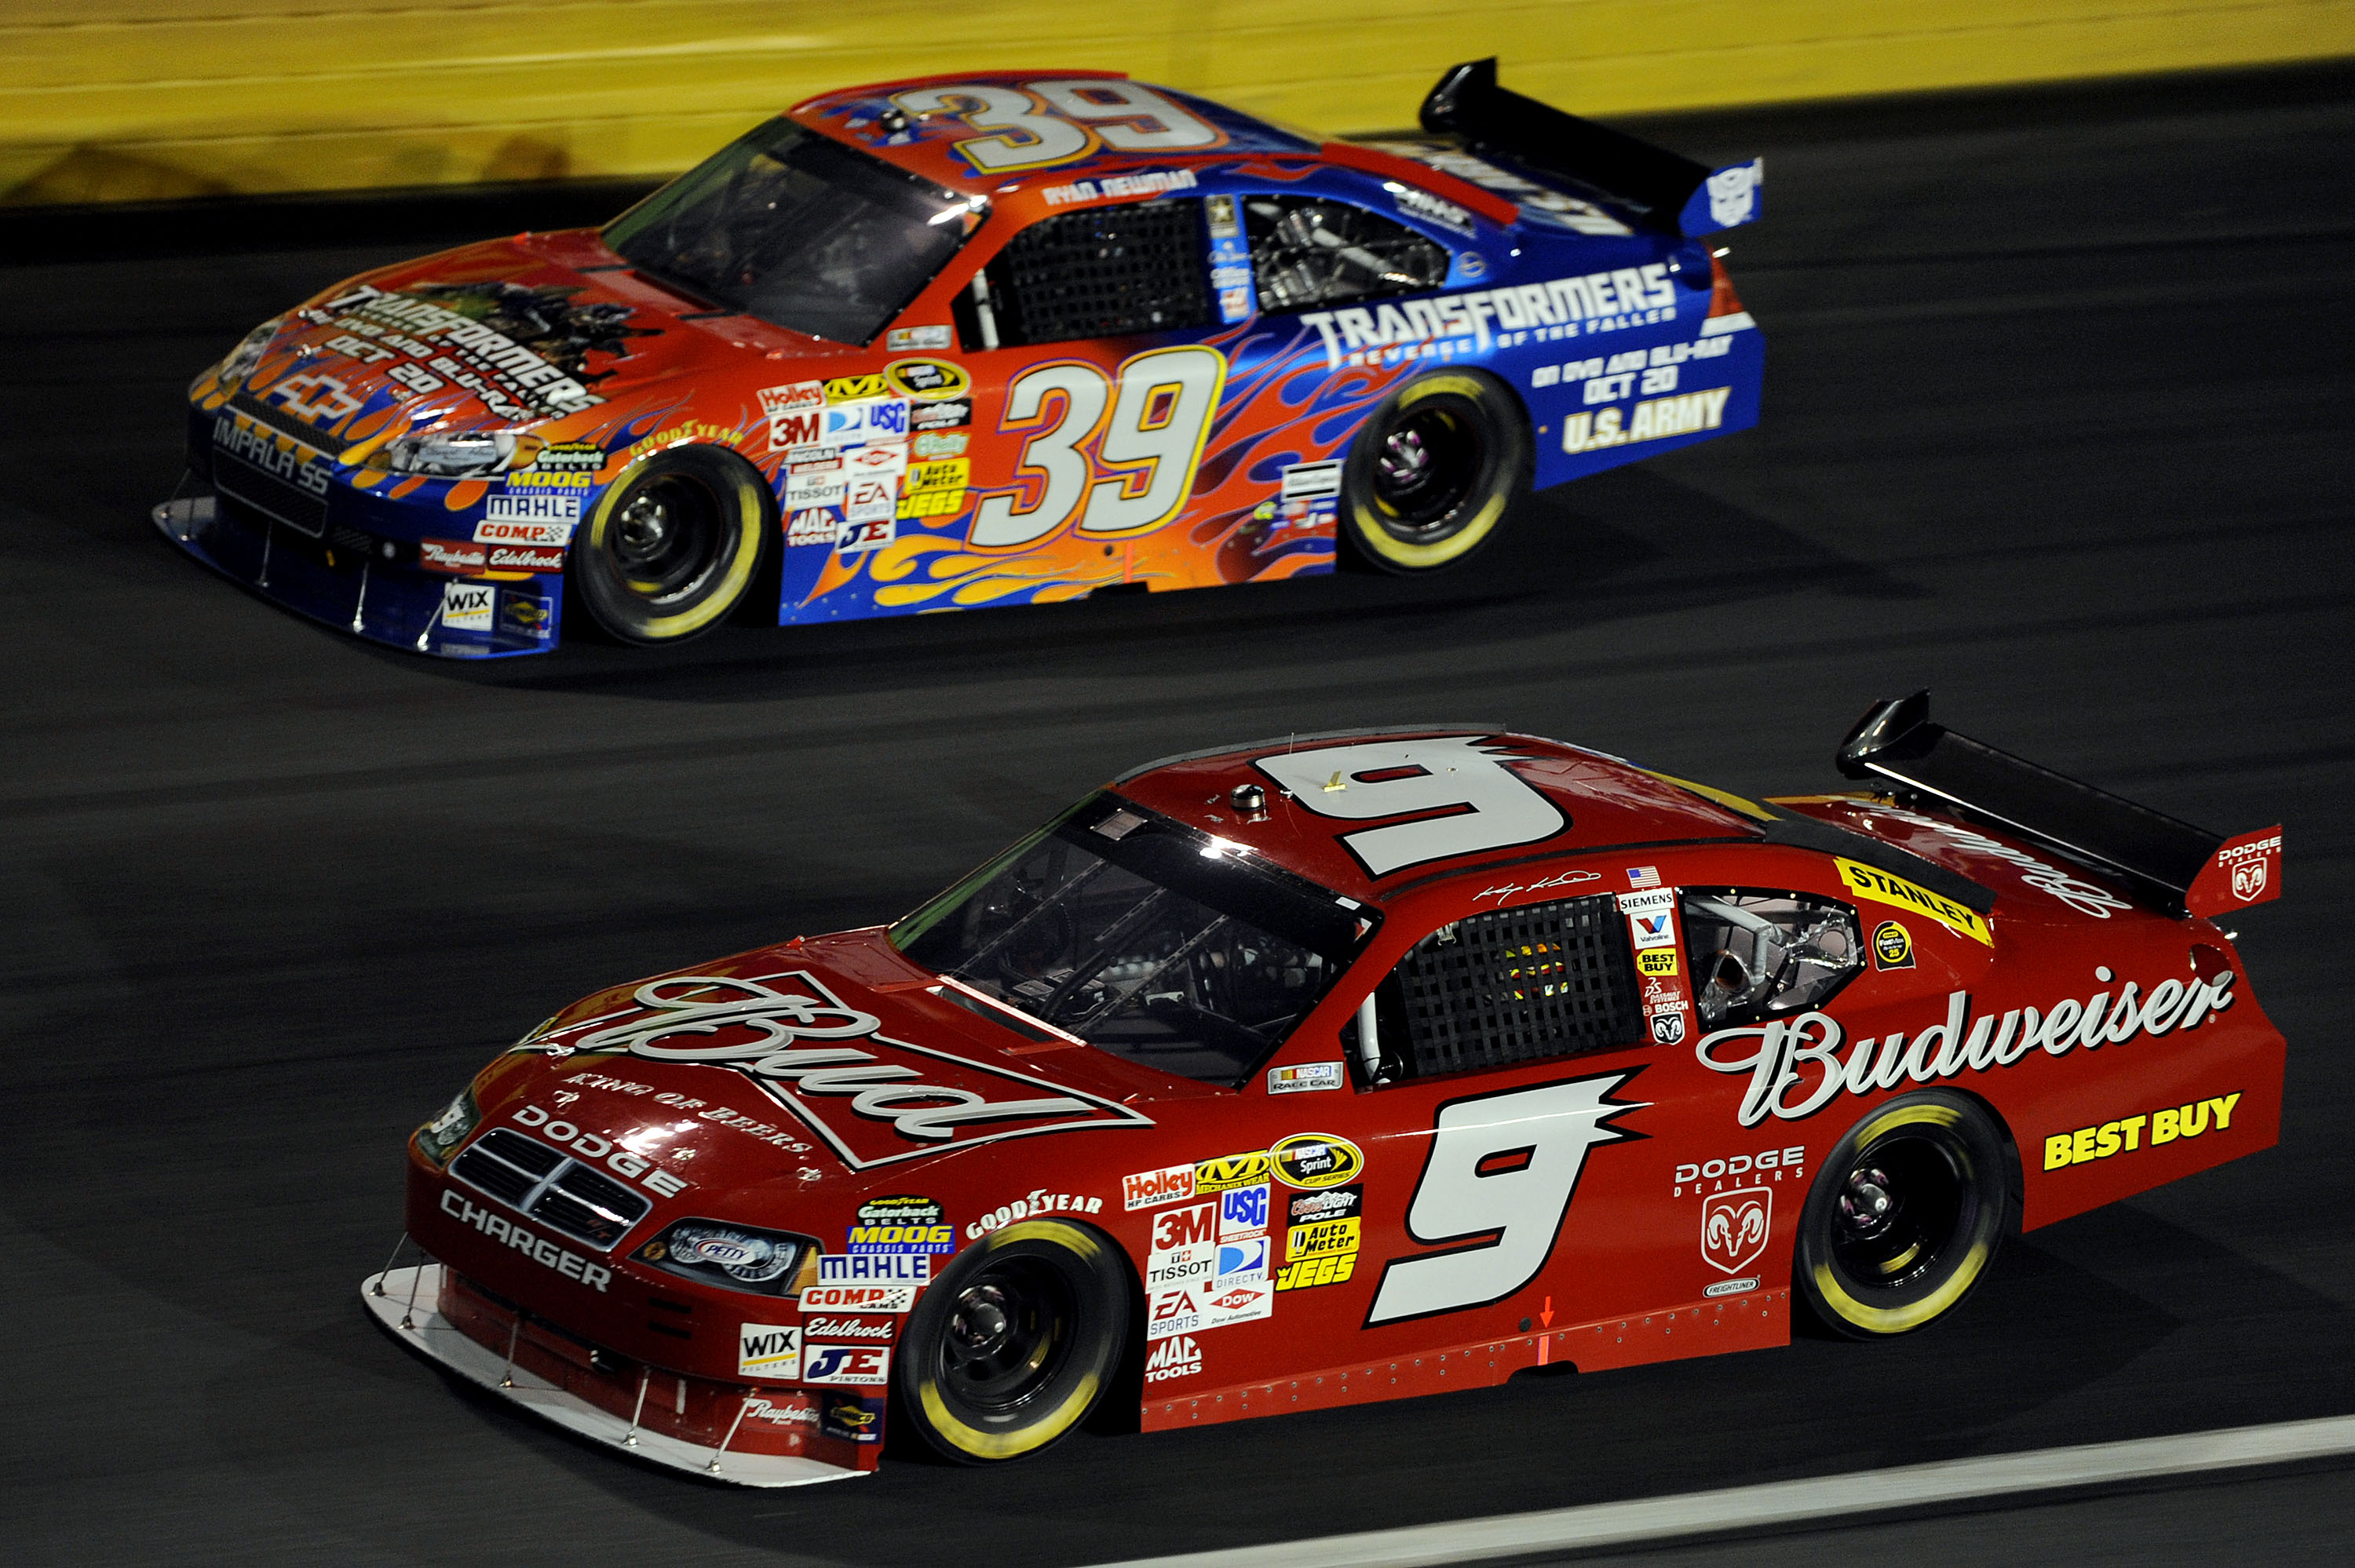 CONCORD, NC - OCTOBER 17:  Ryan Newman, driver of the #39 Transformers Chevrolet, races Kasey Kahne, driver of the #9 Budweiser Dodge, during the NASCAR Sprint Cup Series NASCAR Banking 500 at Lowe's Motor Speedway on October 17, 2009 in Concord, North Ca